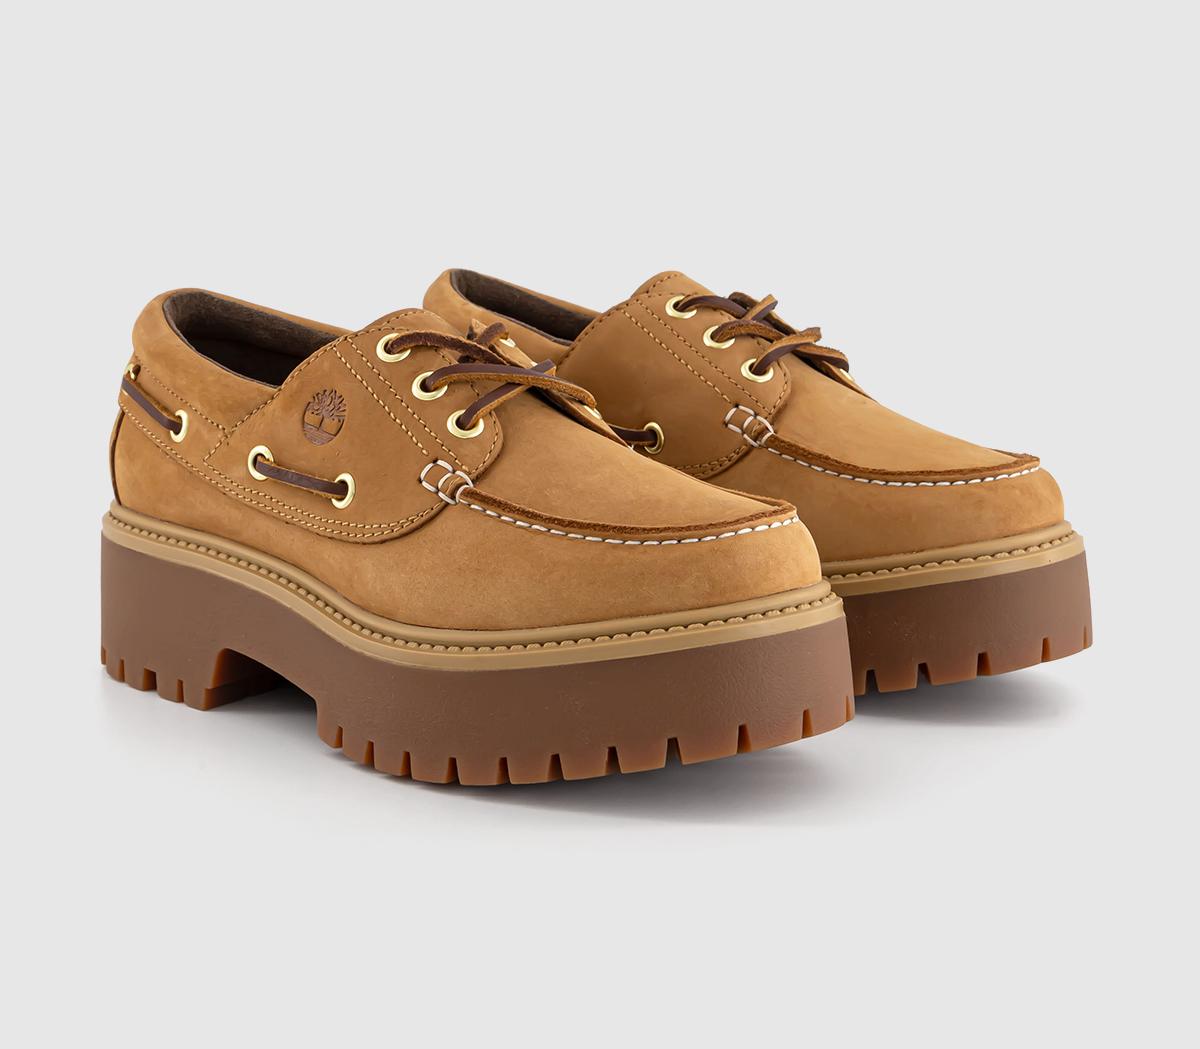 Timberland Womens Stone Street Boat Shoes Wheat Natural, 4